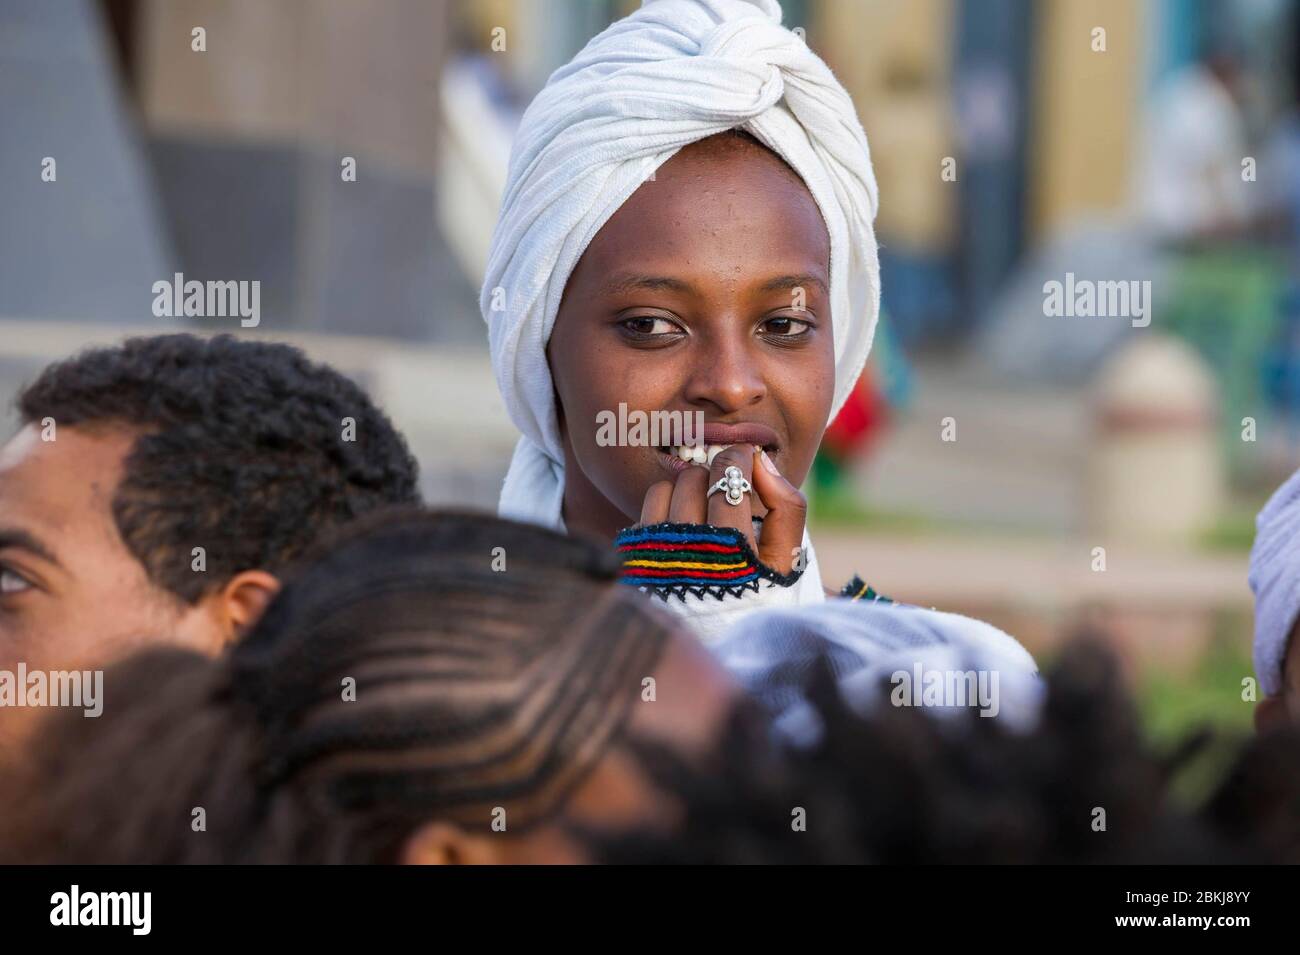 Ethiopia, Gondar, people jubilation during the procession marking the Timkat festival, or Epiphany, and the 200 th anniversary of the death of the Theodros king, amharic beauty Stock Photo